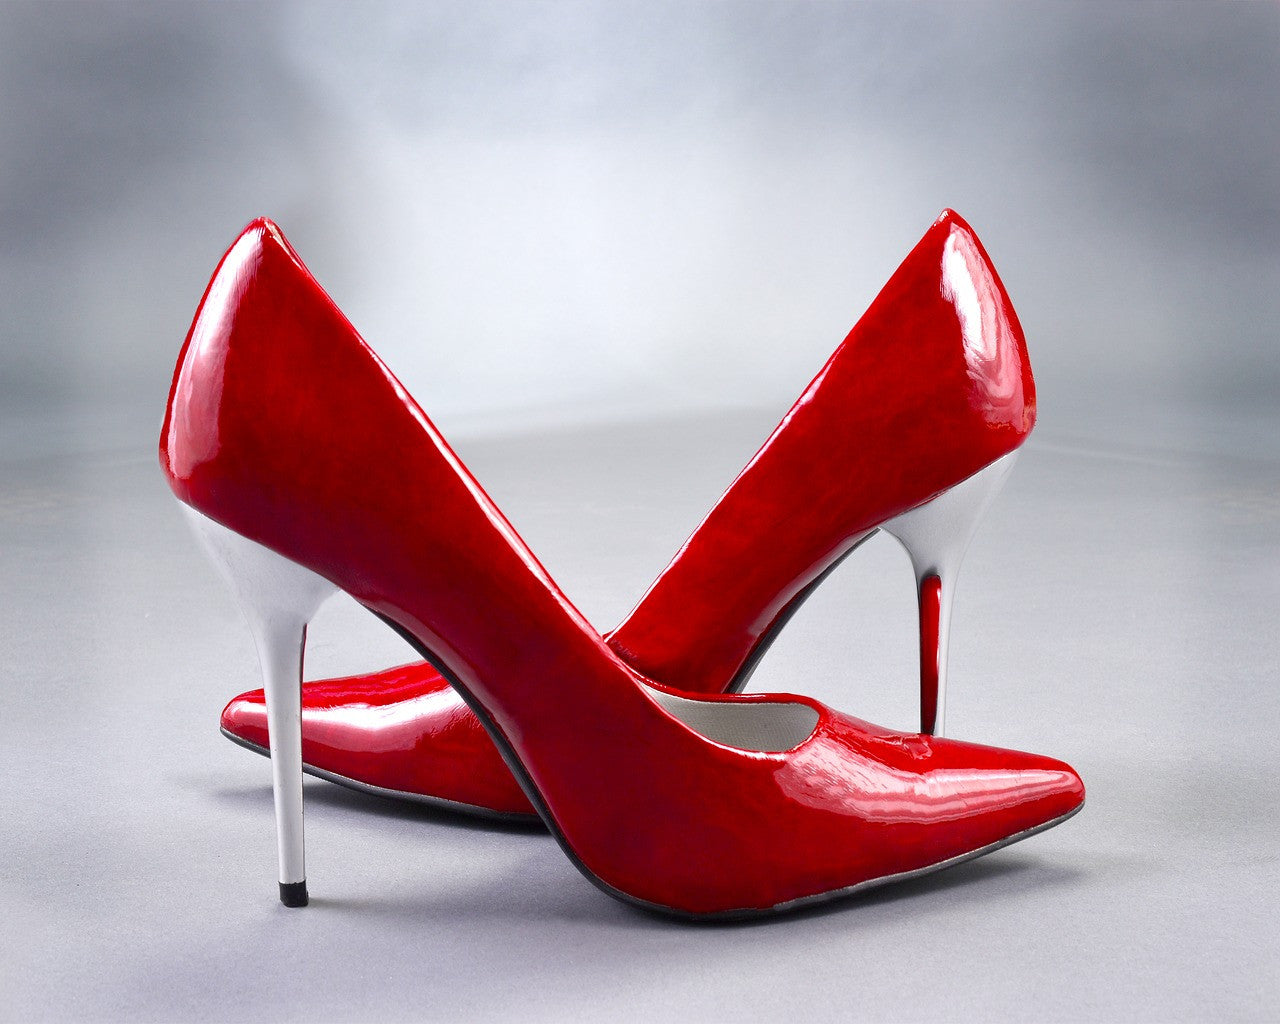 Action needed to stop forcing women to wear high heels at work